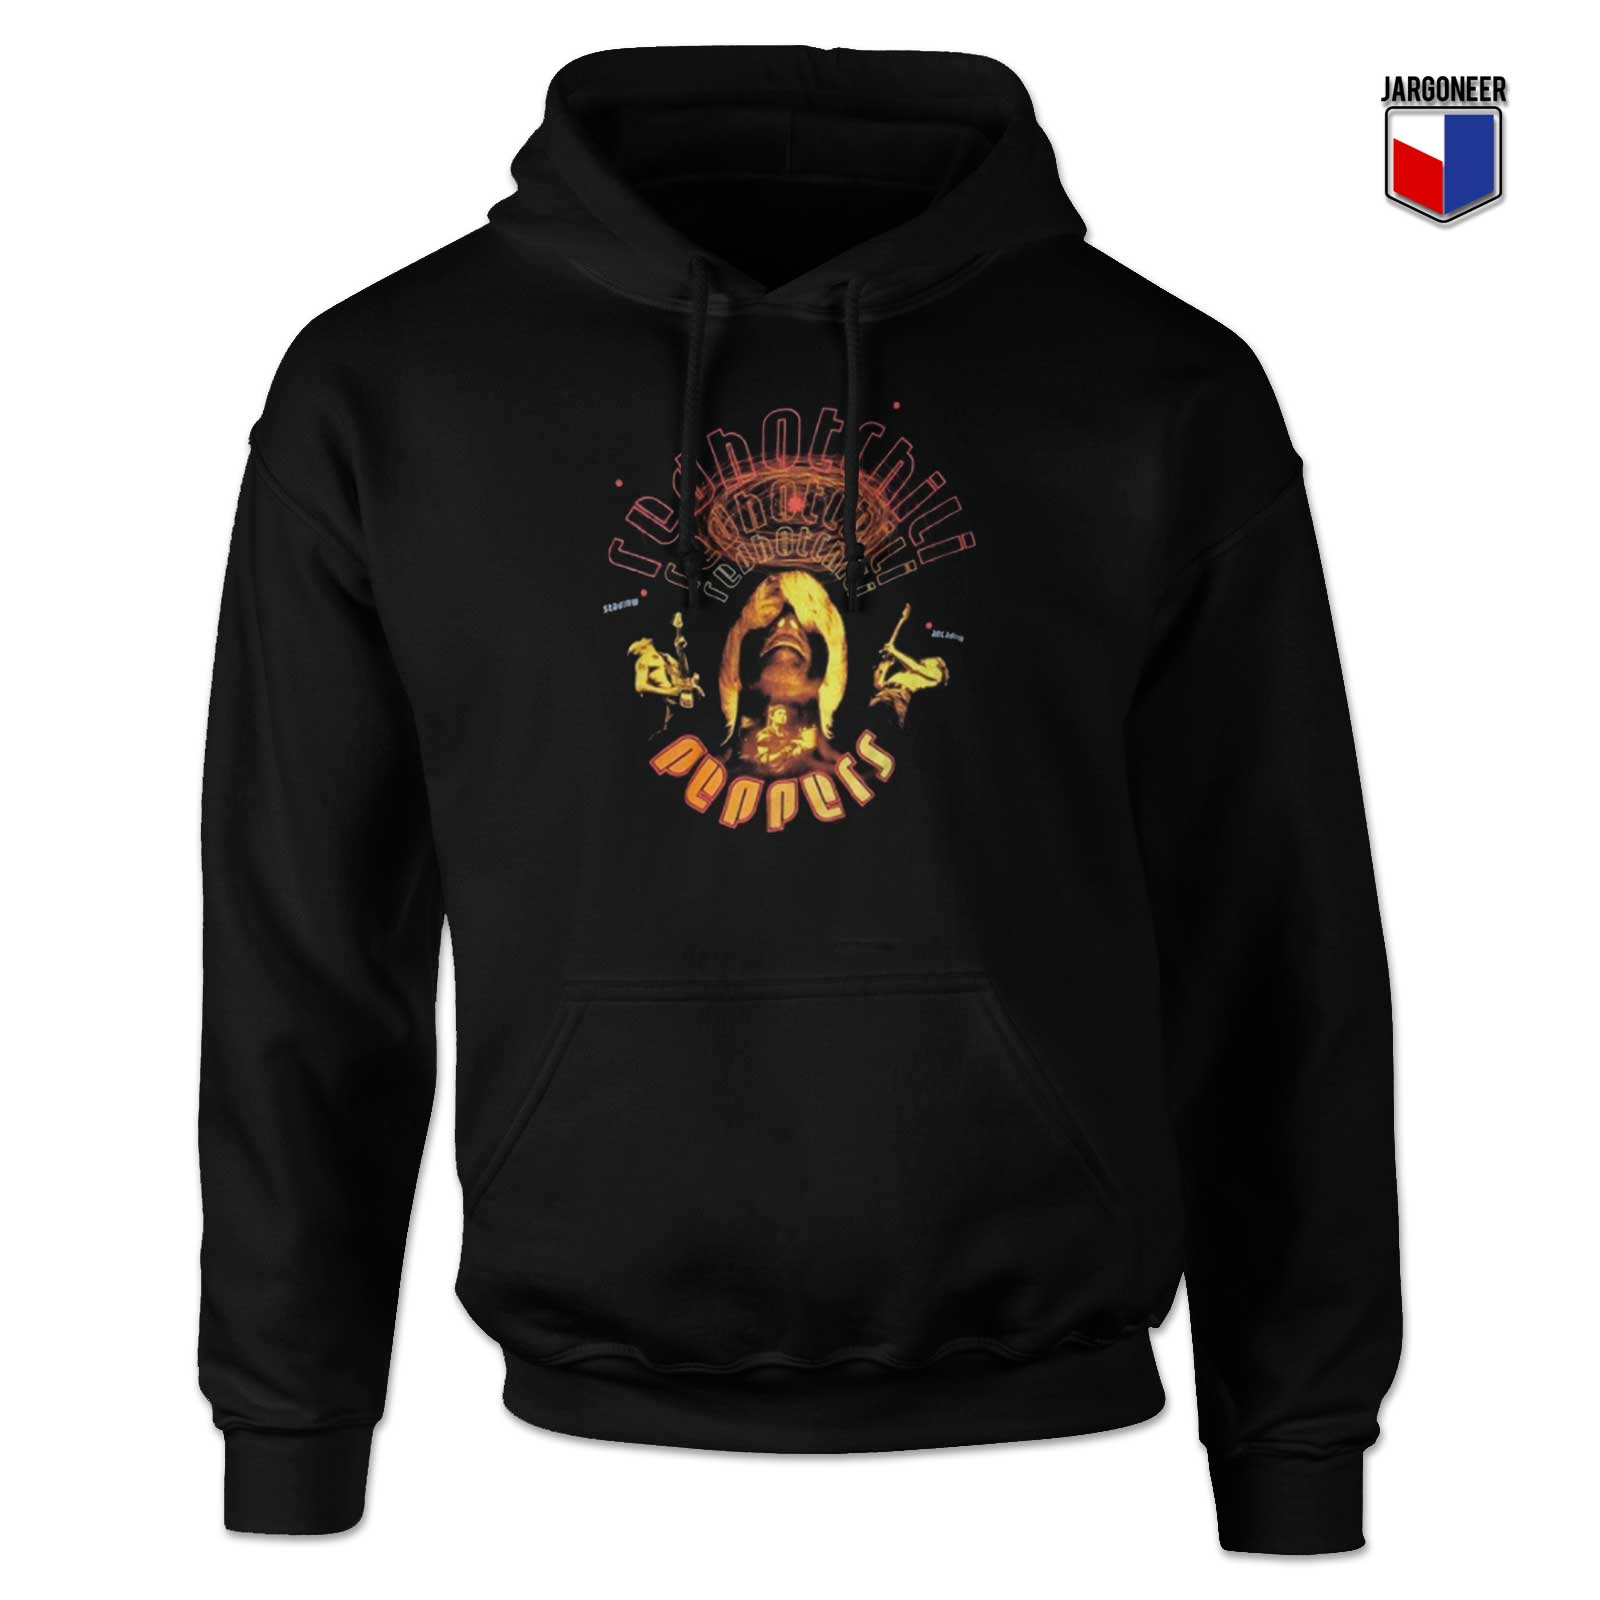 Red Hot Chili Peppers Hoodie - Shop Unique Graphic Cool Shirt Designs